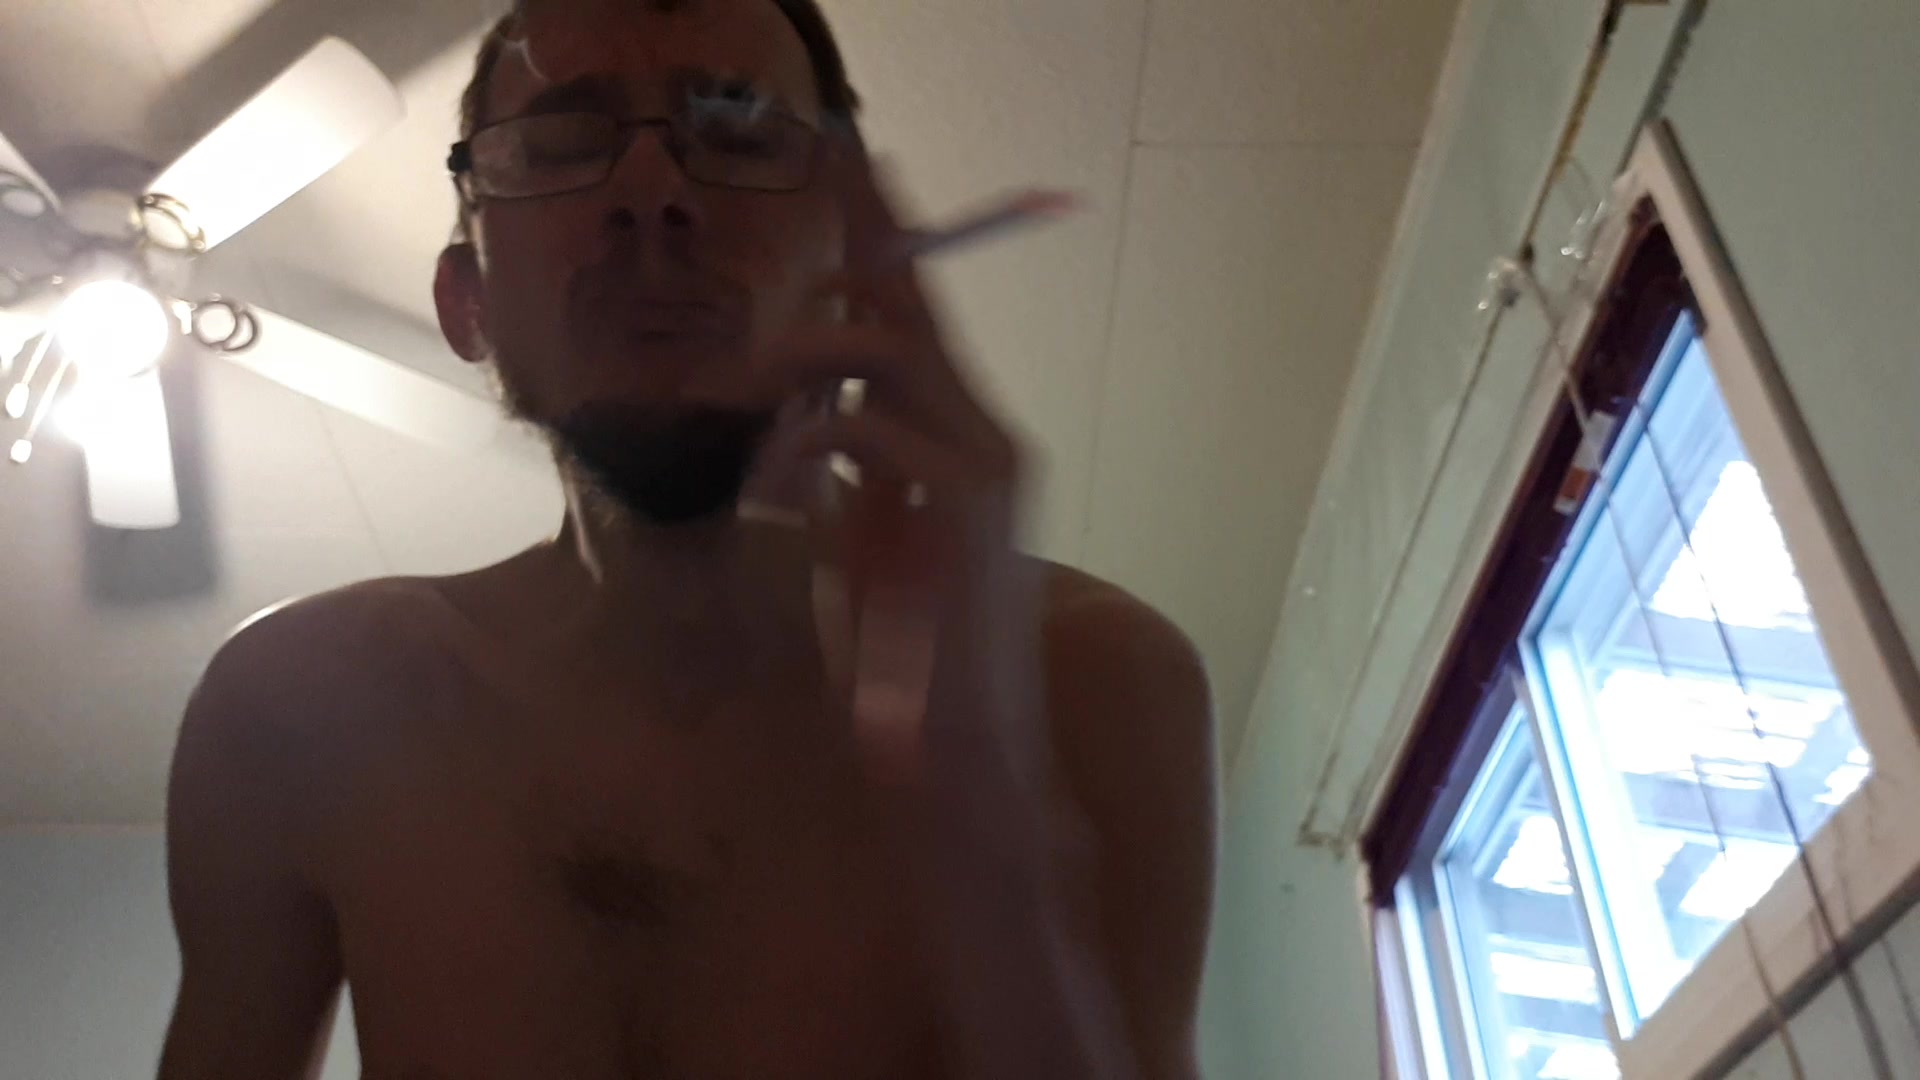 Smoking and jerking naked - video 3